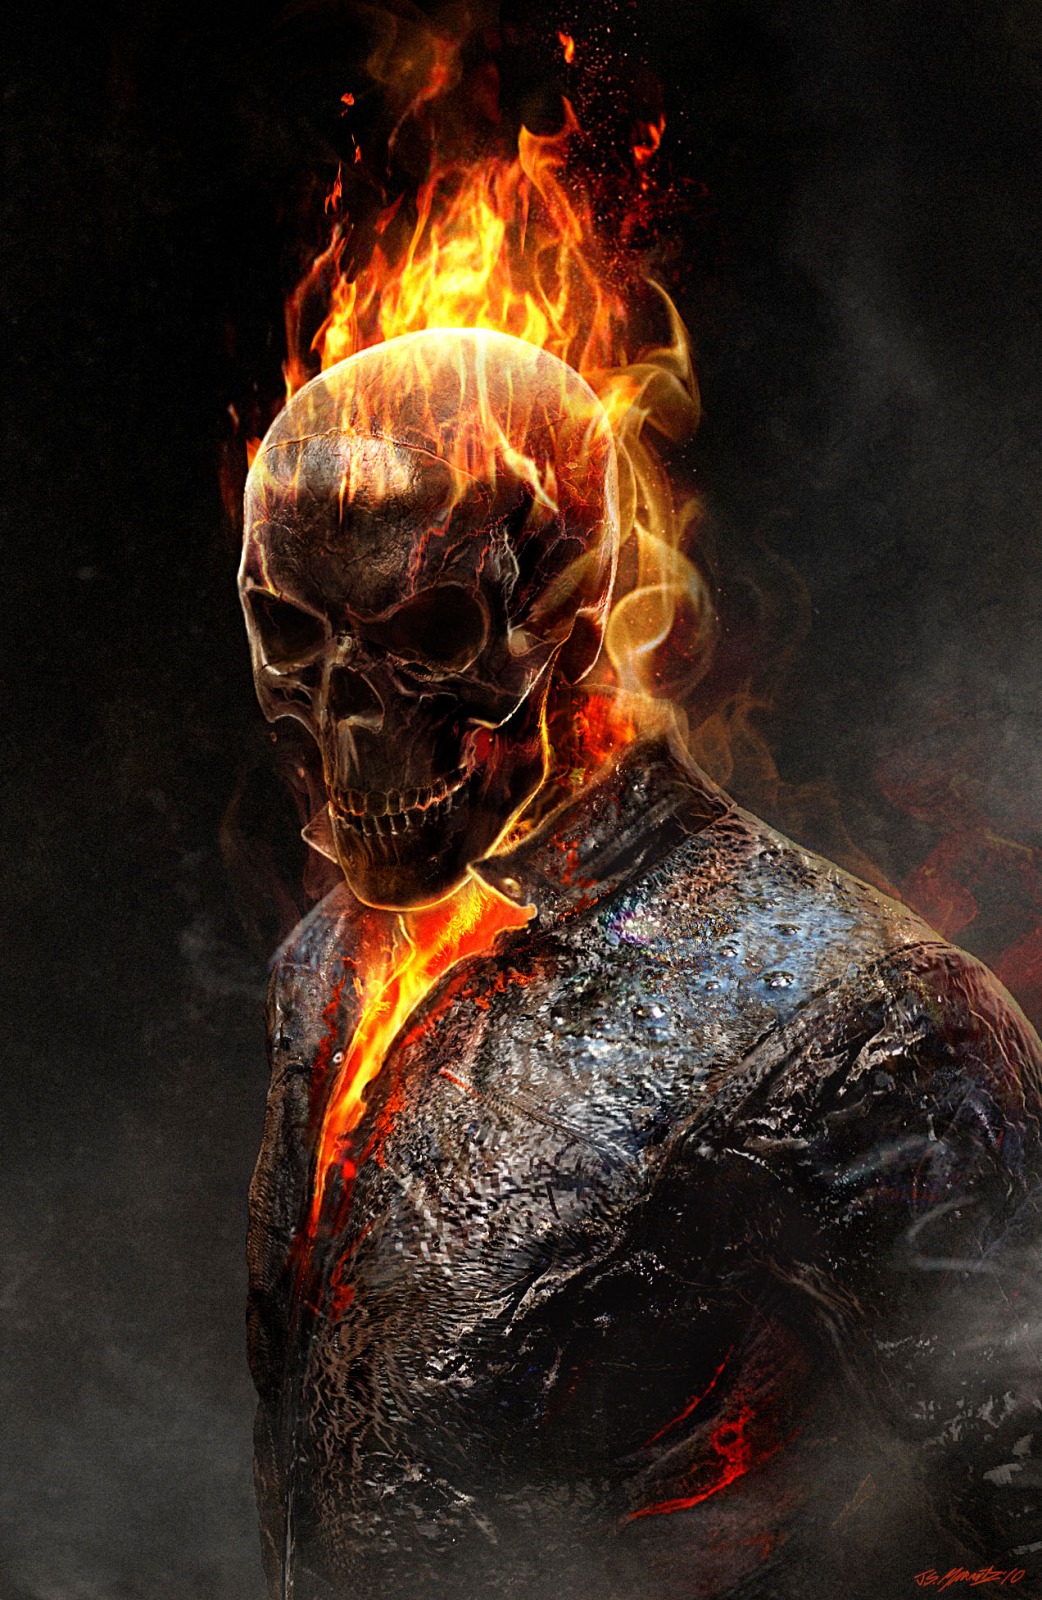 Free download Ghost Rider image ghost rider HD wallpaper and background photo [1042x1600] for your Desktop, Mobile & Tablet. Explore Ghost Rider HD Wallpaper. Ghost Rider Wallpaper, Ghost Rider